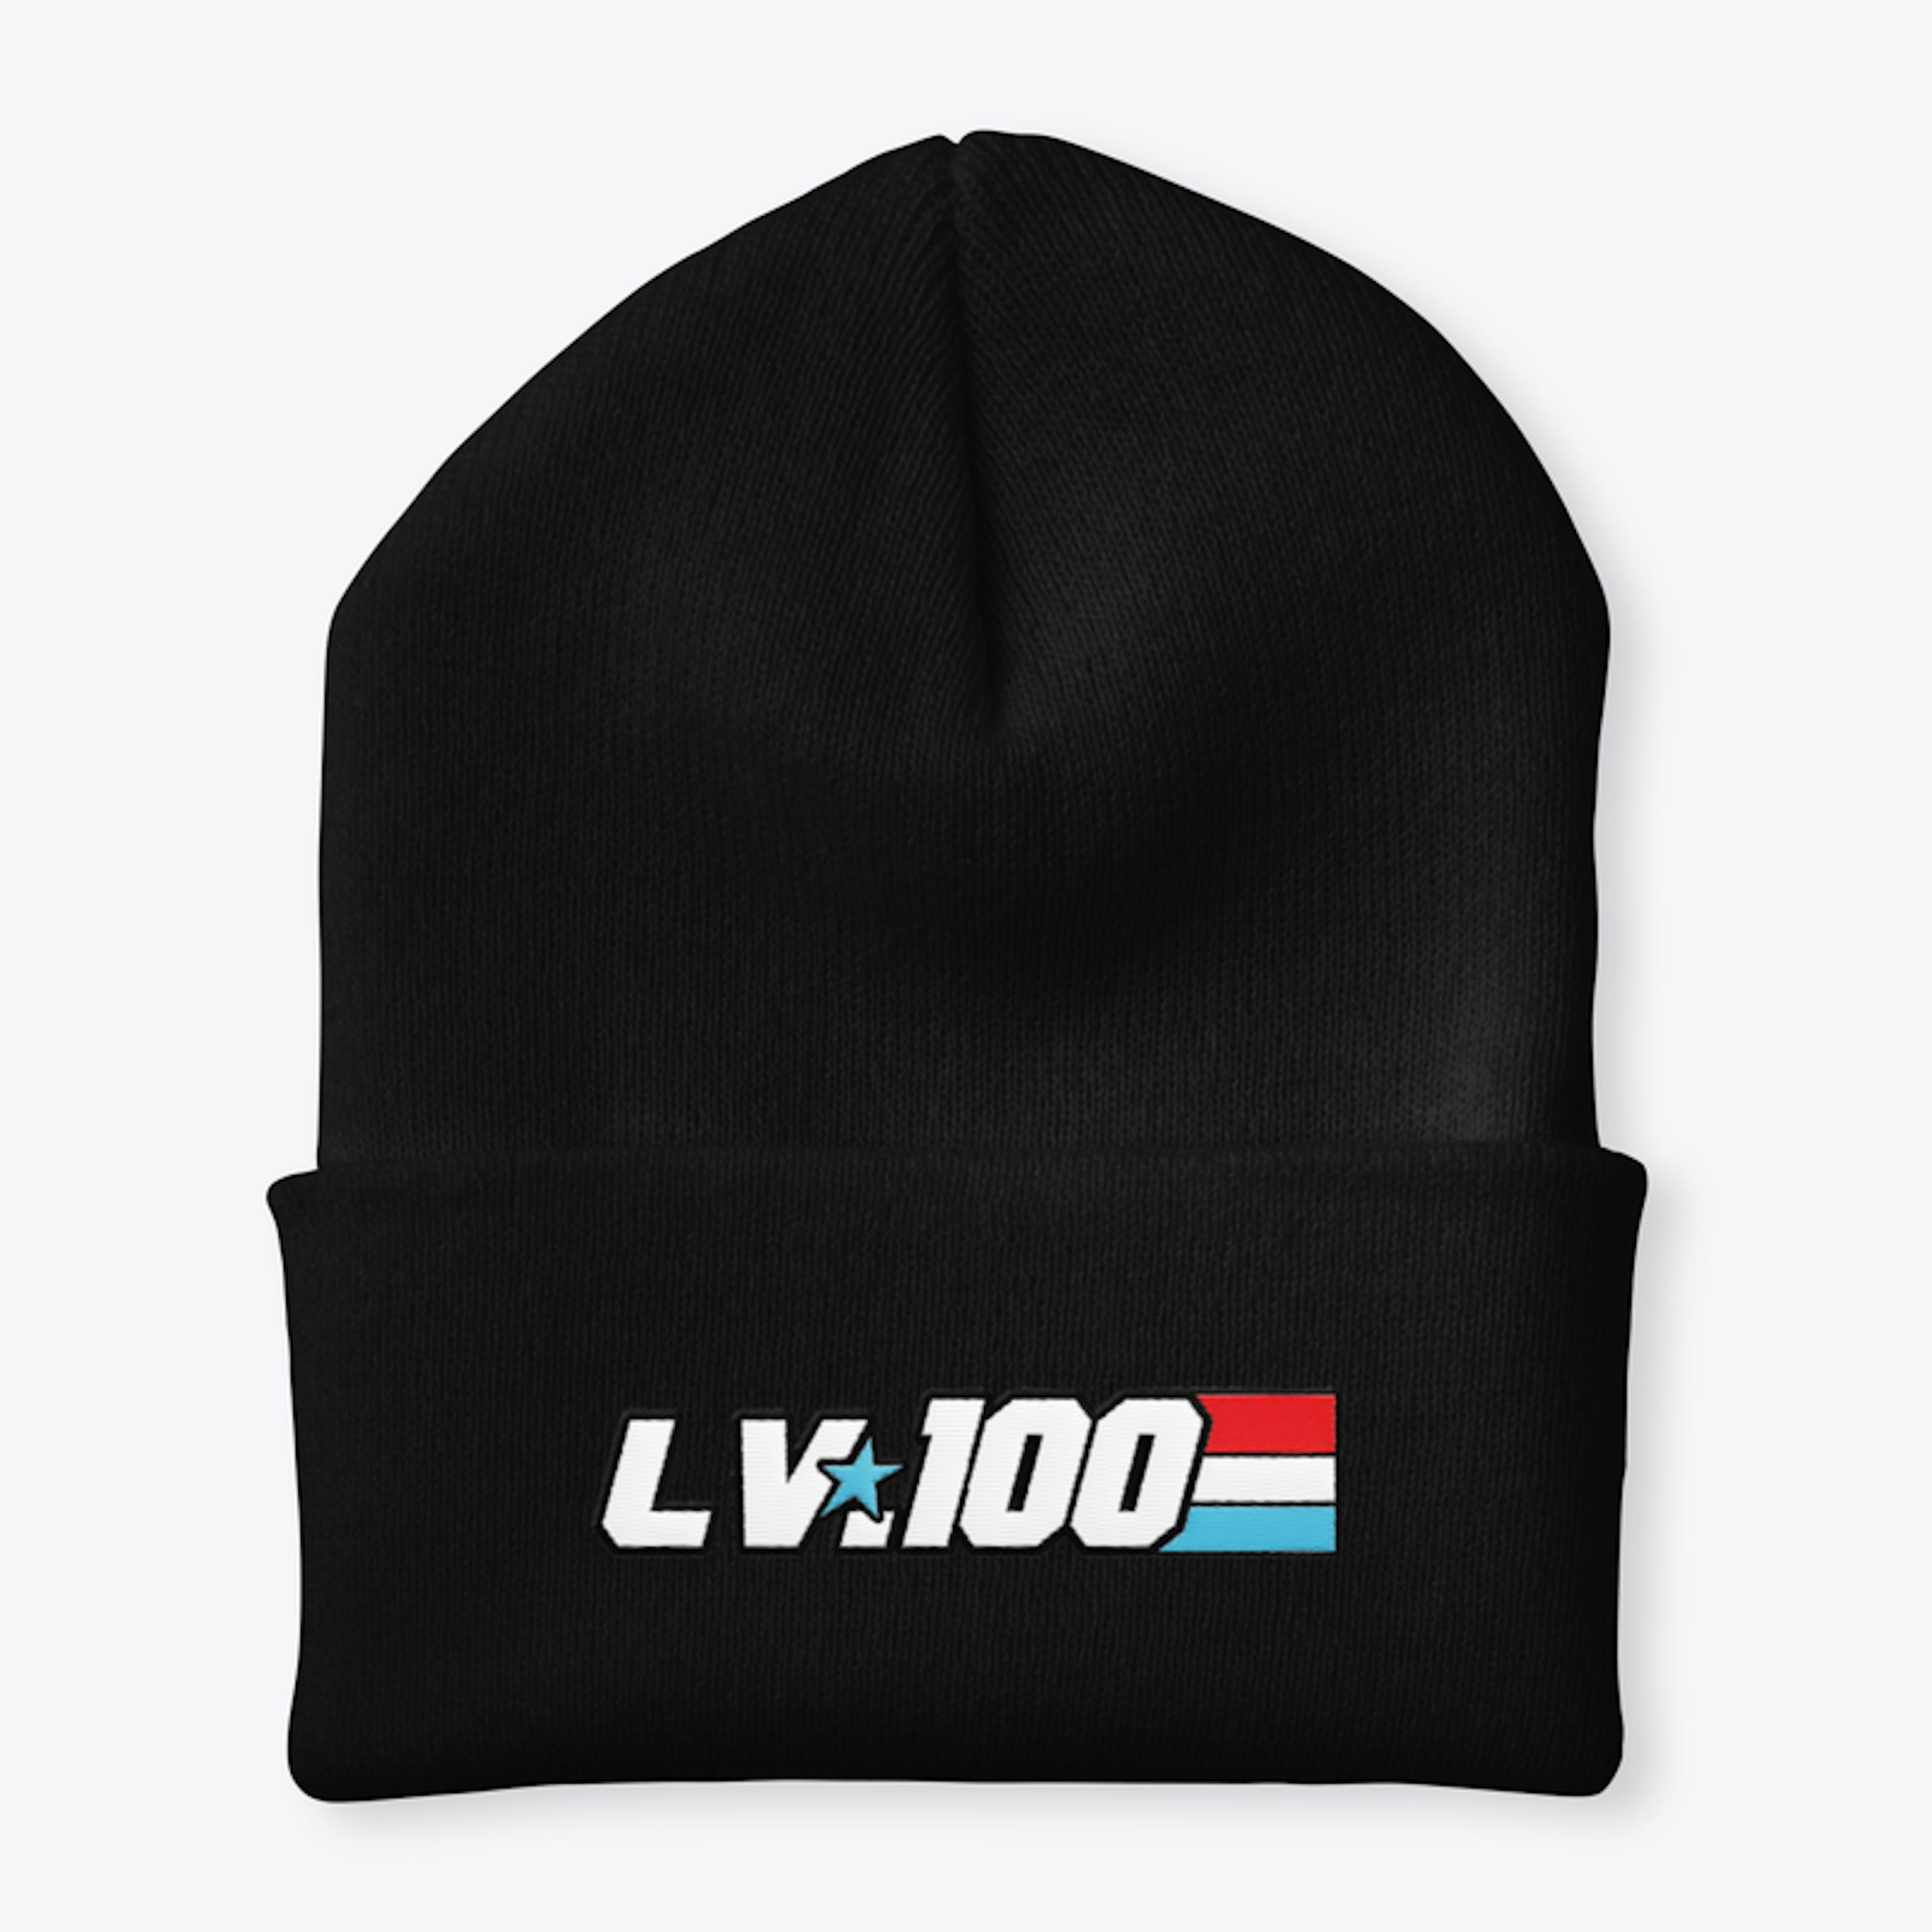 GO LV. 100! (Embroidered Knit Hat)